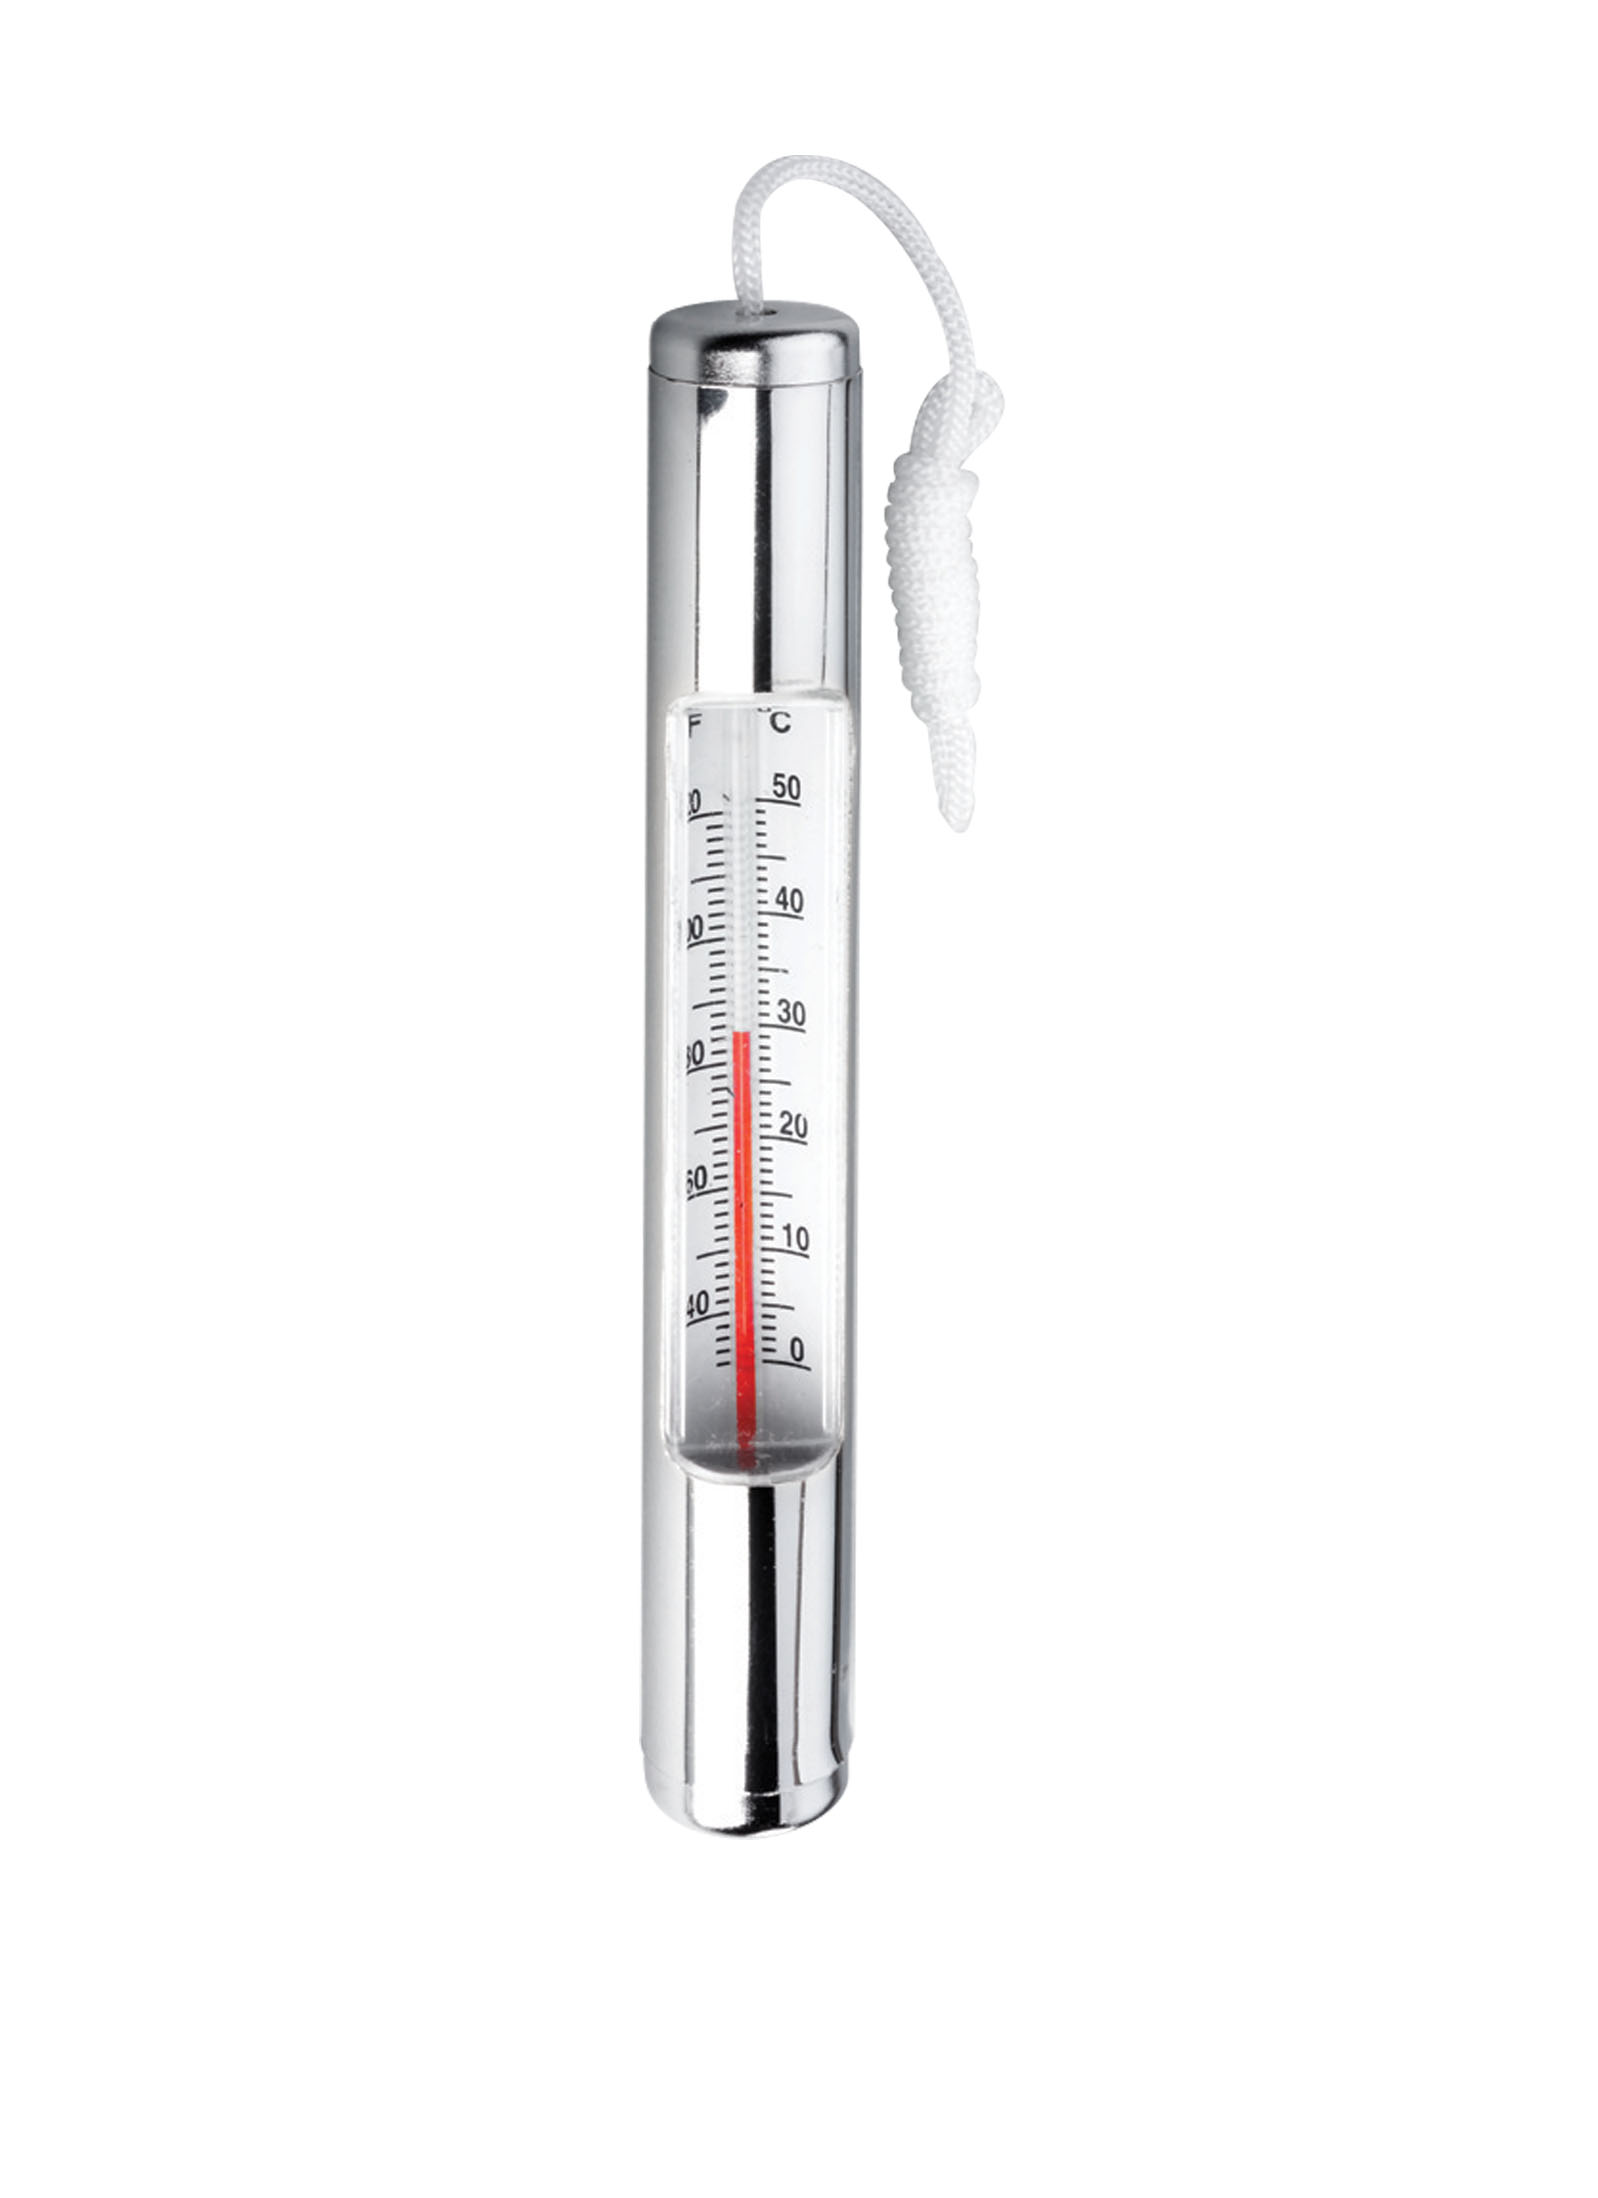 Thermometer Chrome Plated 150025PT - LINERS